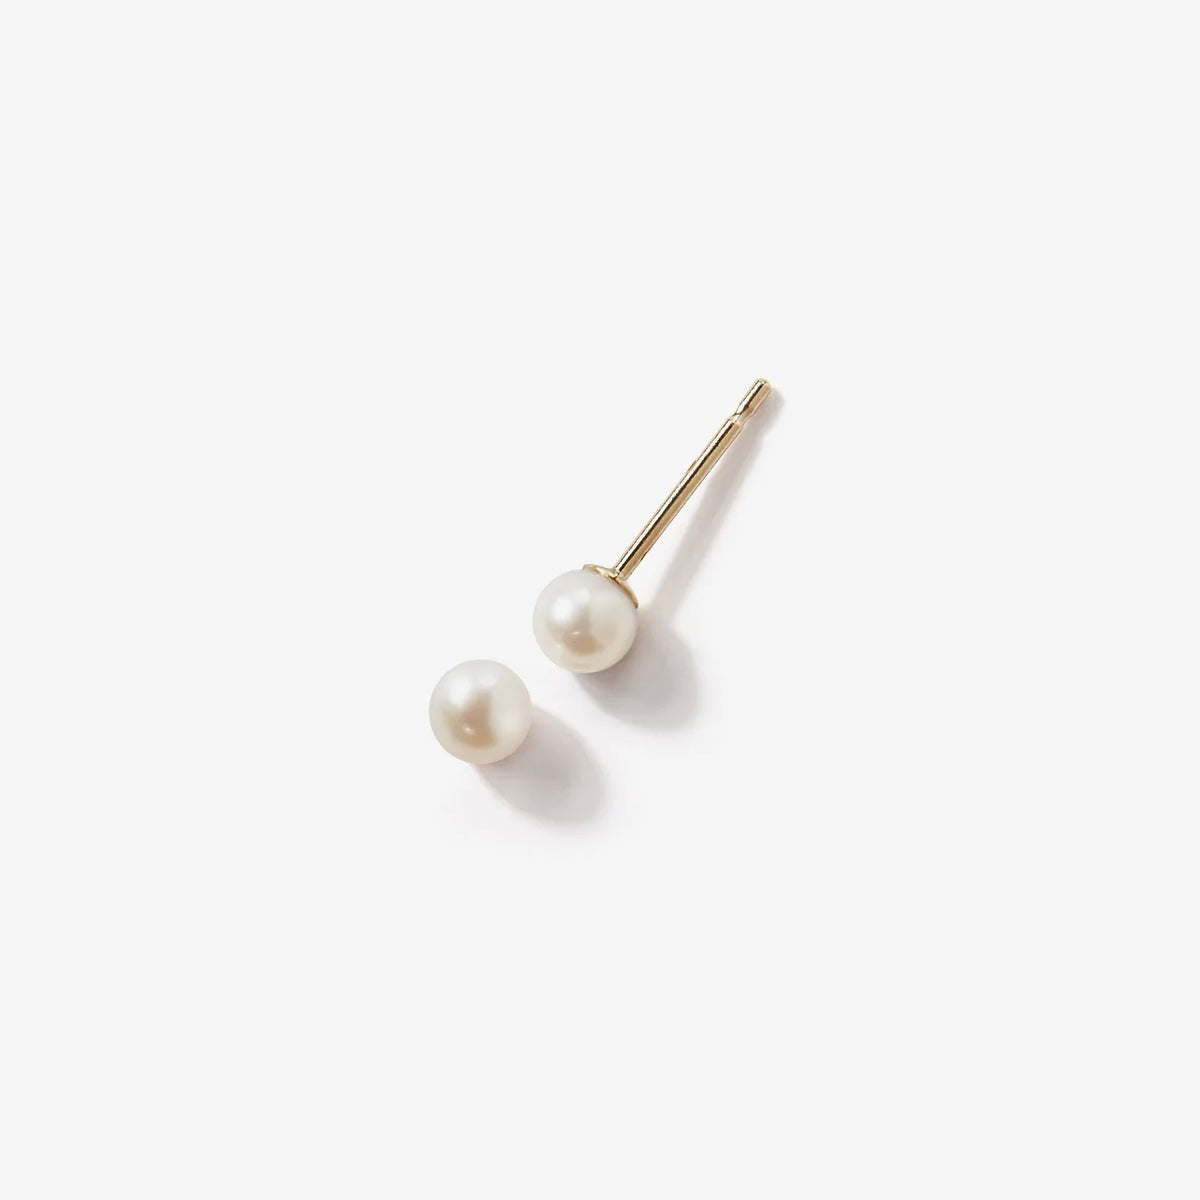 Top and side view of Baby Pearl Stud Earring